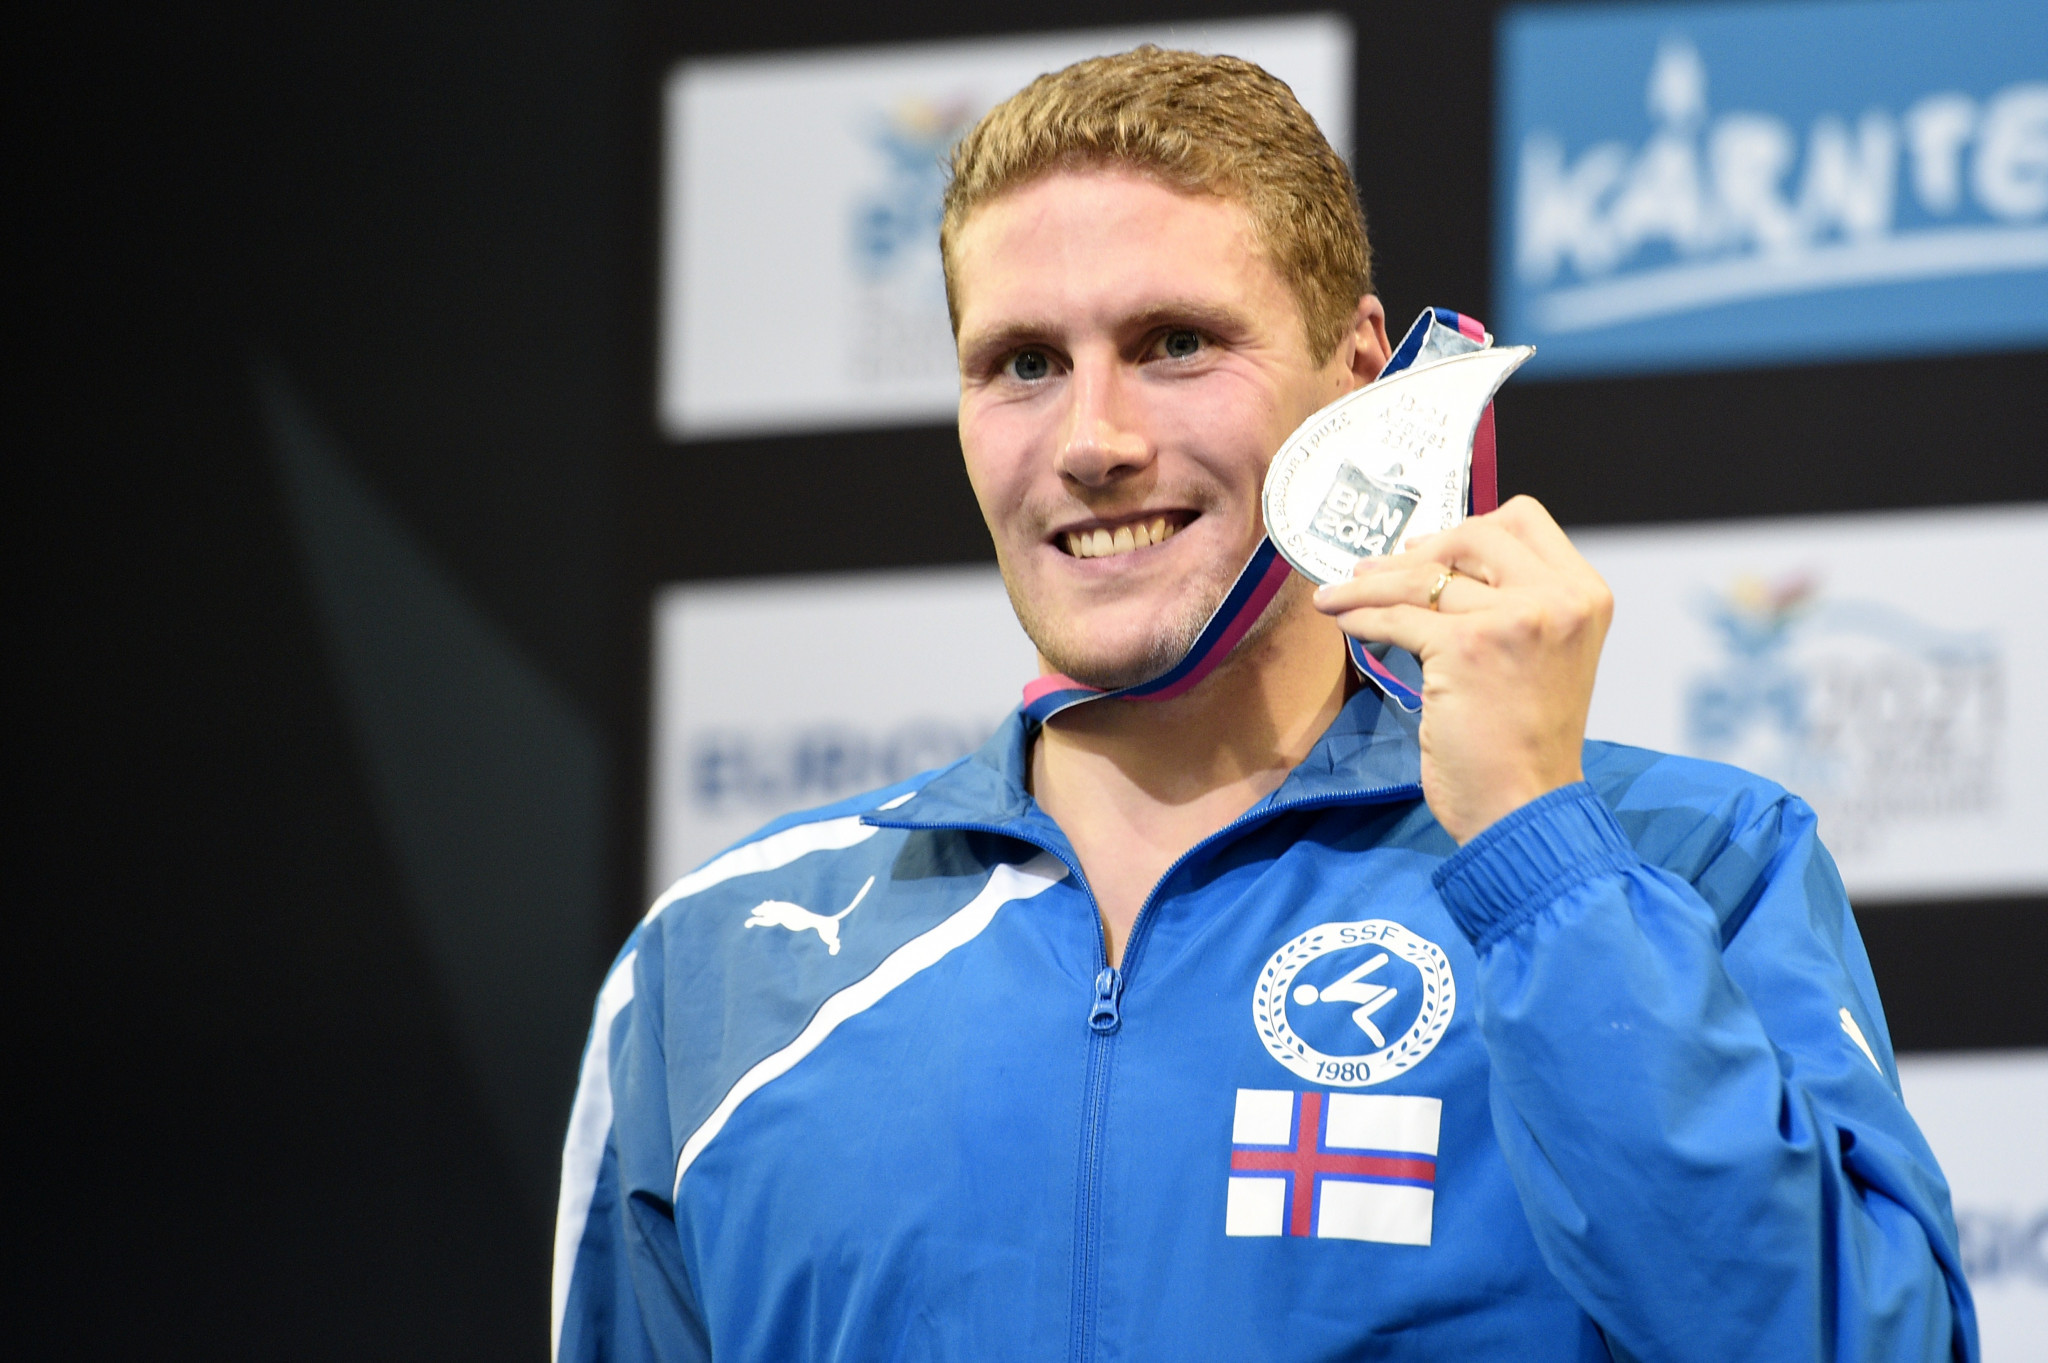 Swimmer Pál Joensen is one of the leading athletes from the Faroe Islands, but competed for Denmark at the Olympic Games ©Getty Images